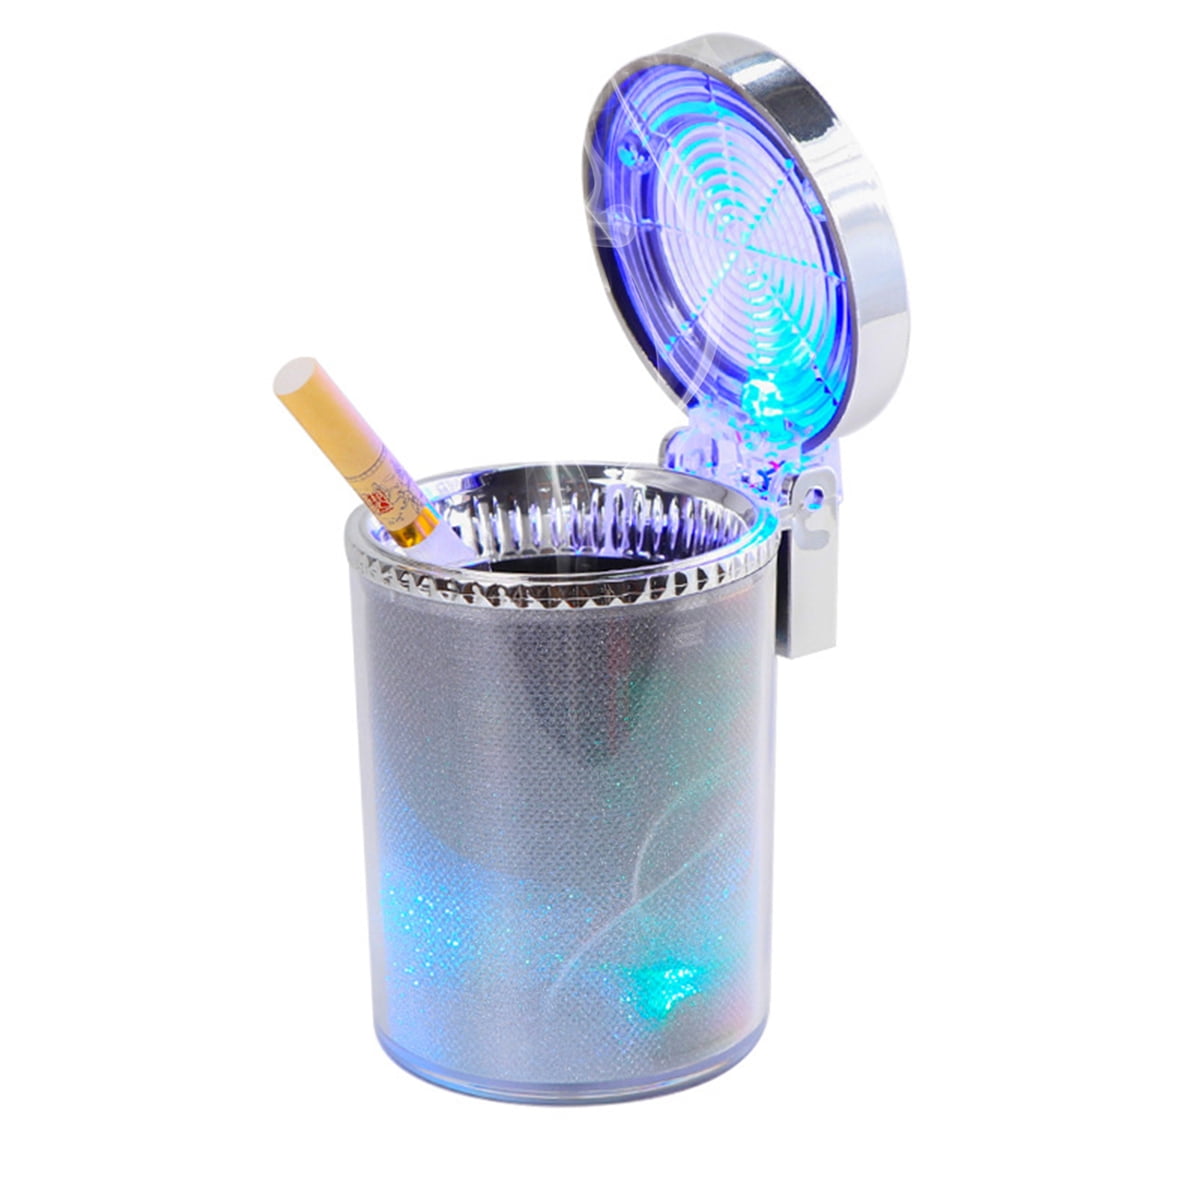 HOTBEST Car Ashtray with LED Light and Flip Lid Self Extinguishing Ash Tray  Air Vent Ash Tray Container Smoke Cup Holder Plastic Vehicle Ashtray for